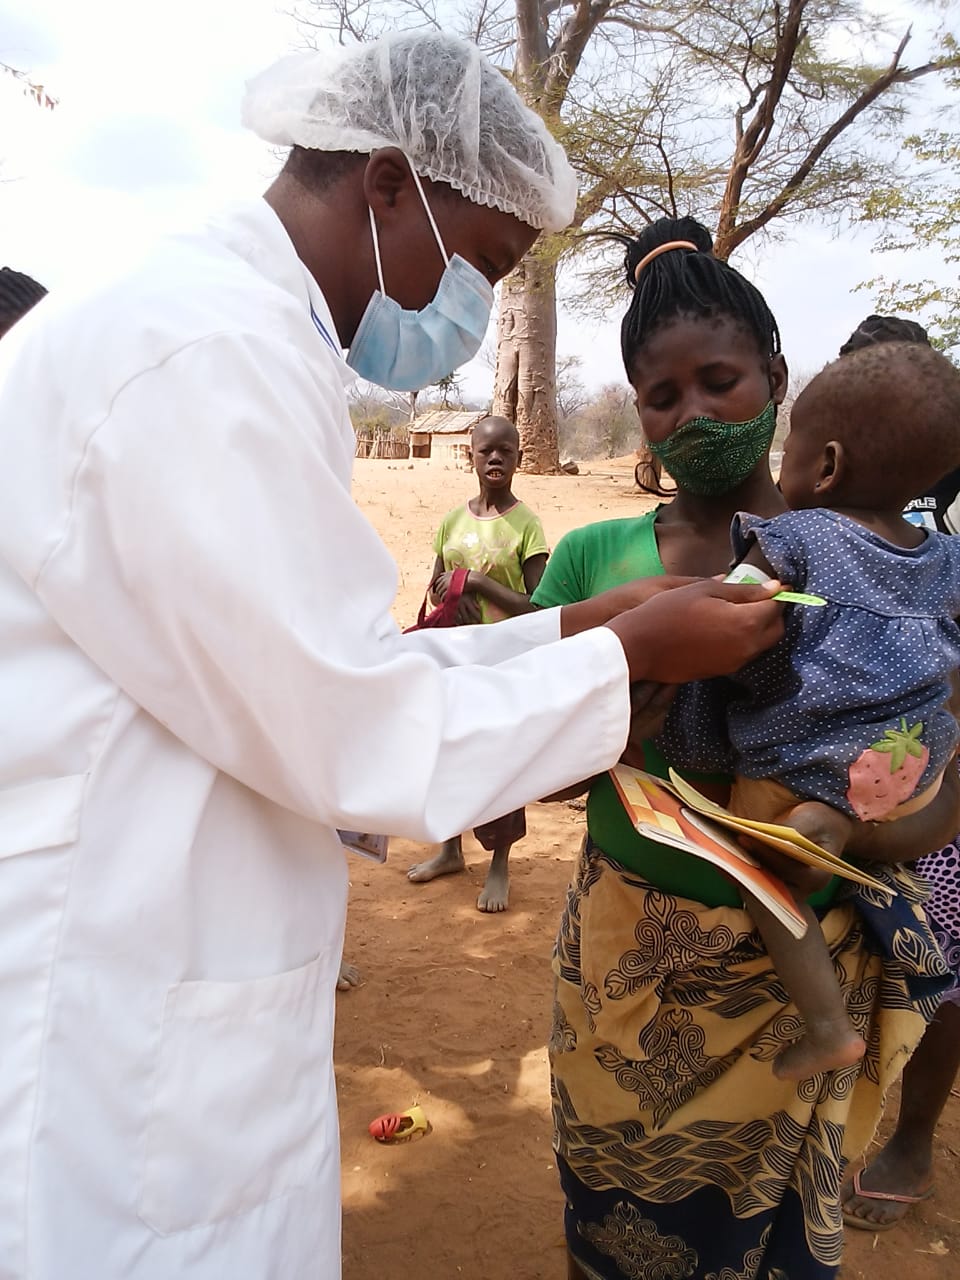 A health care worker screening a young child for malnutrition